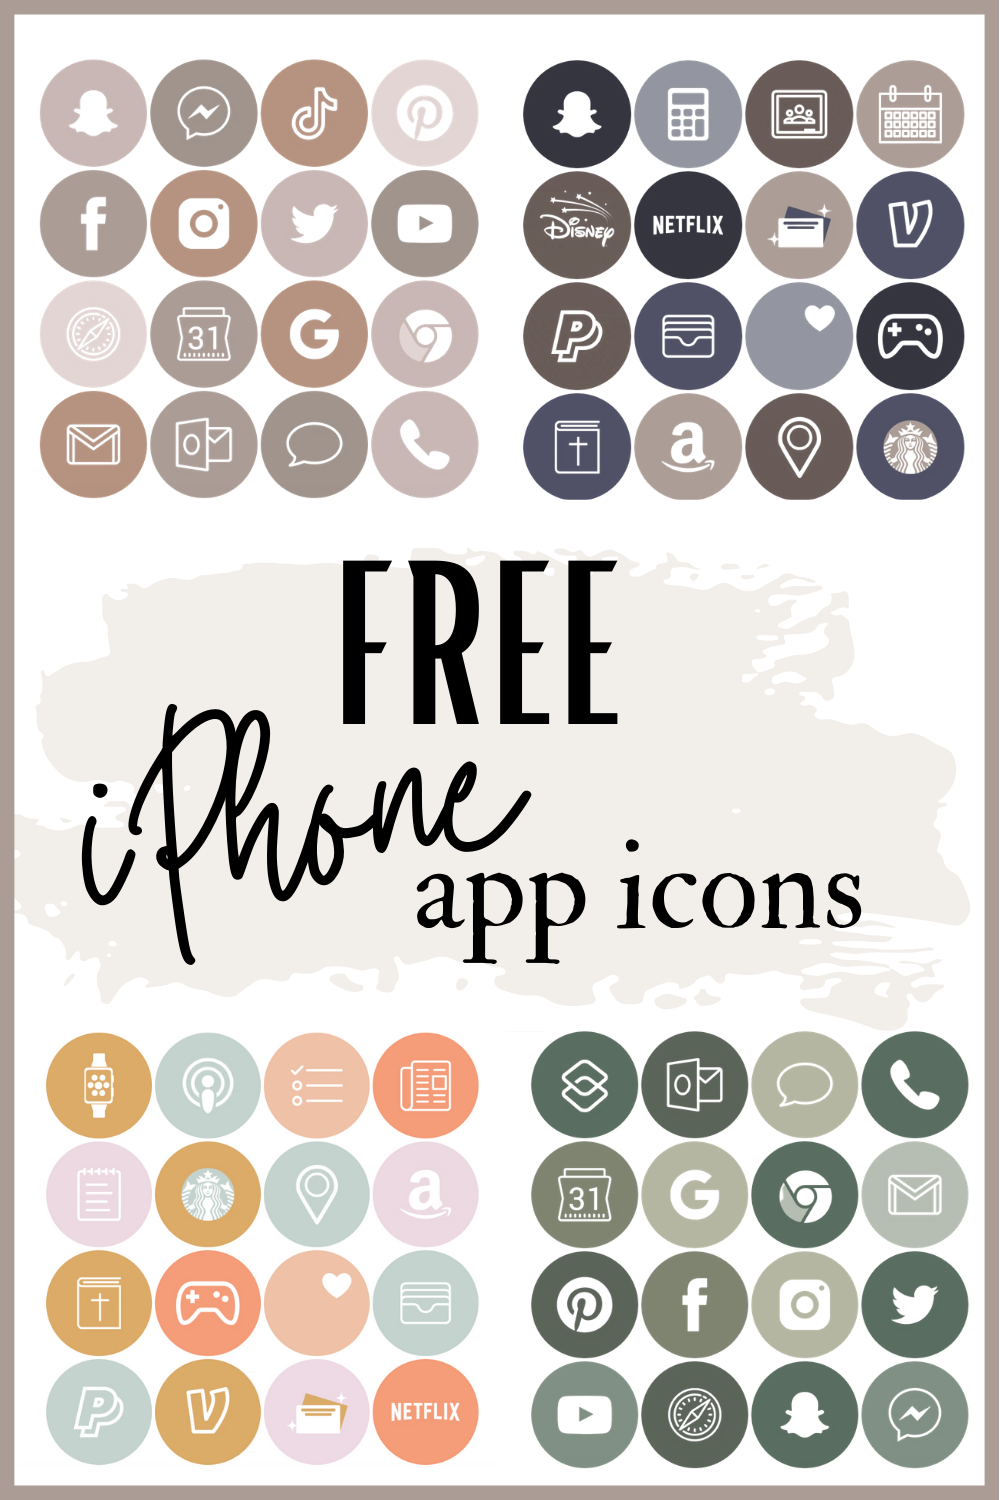 iphone app icon generator by pt